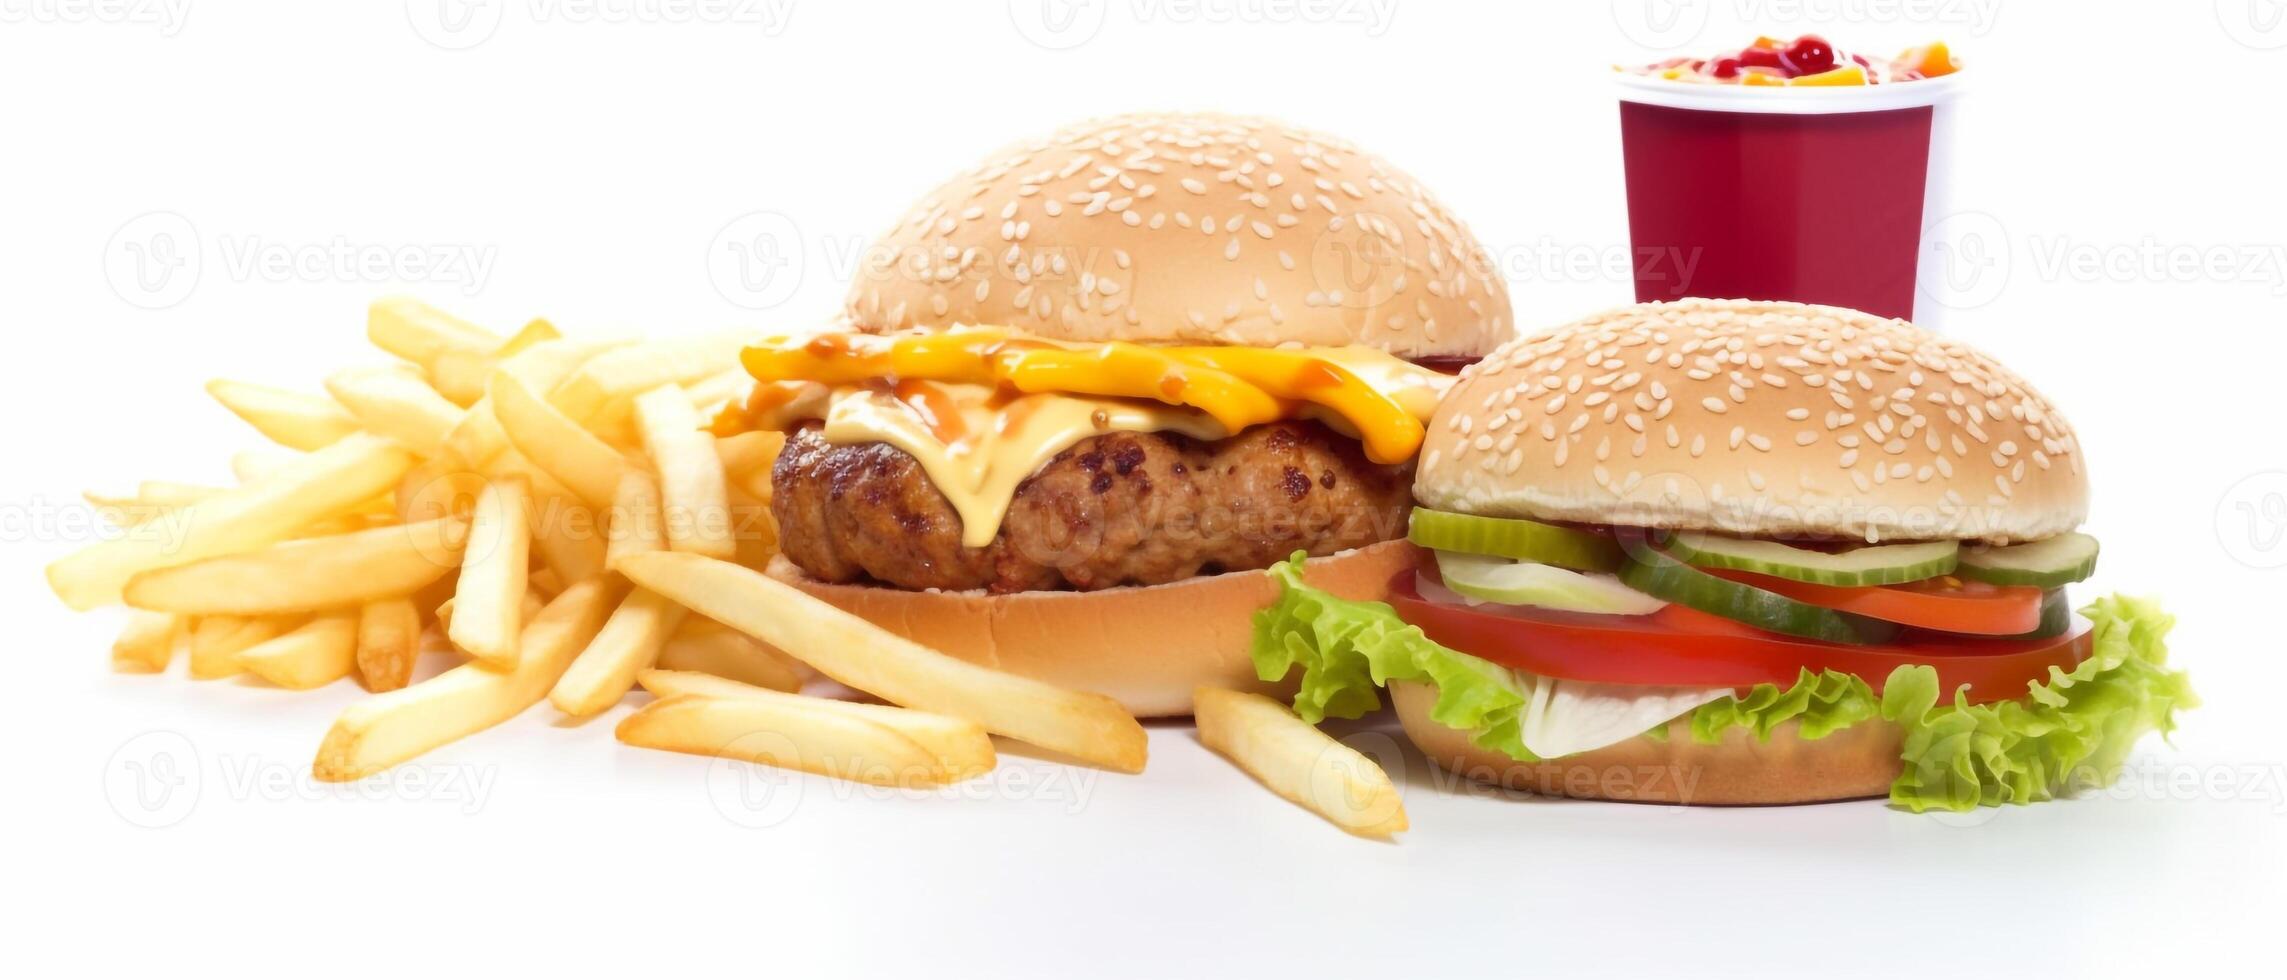 Junk food, fast food, burger, french fries. photo